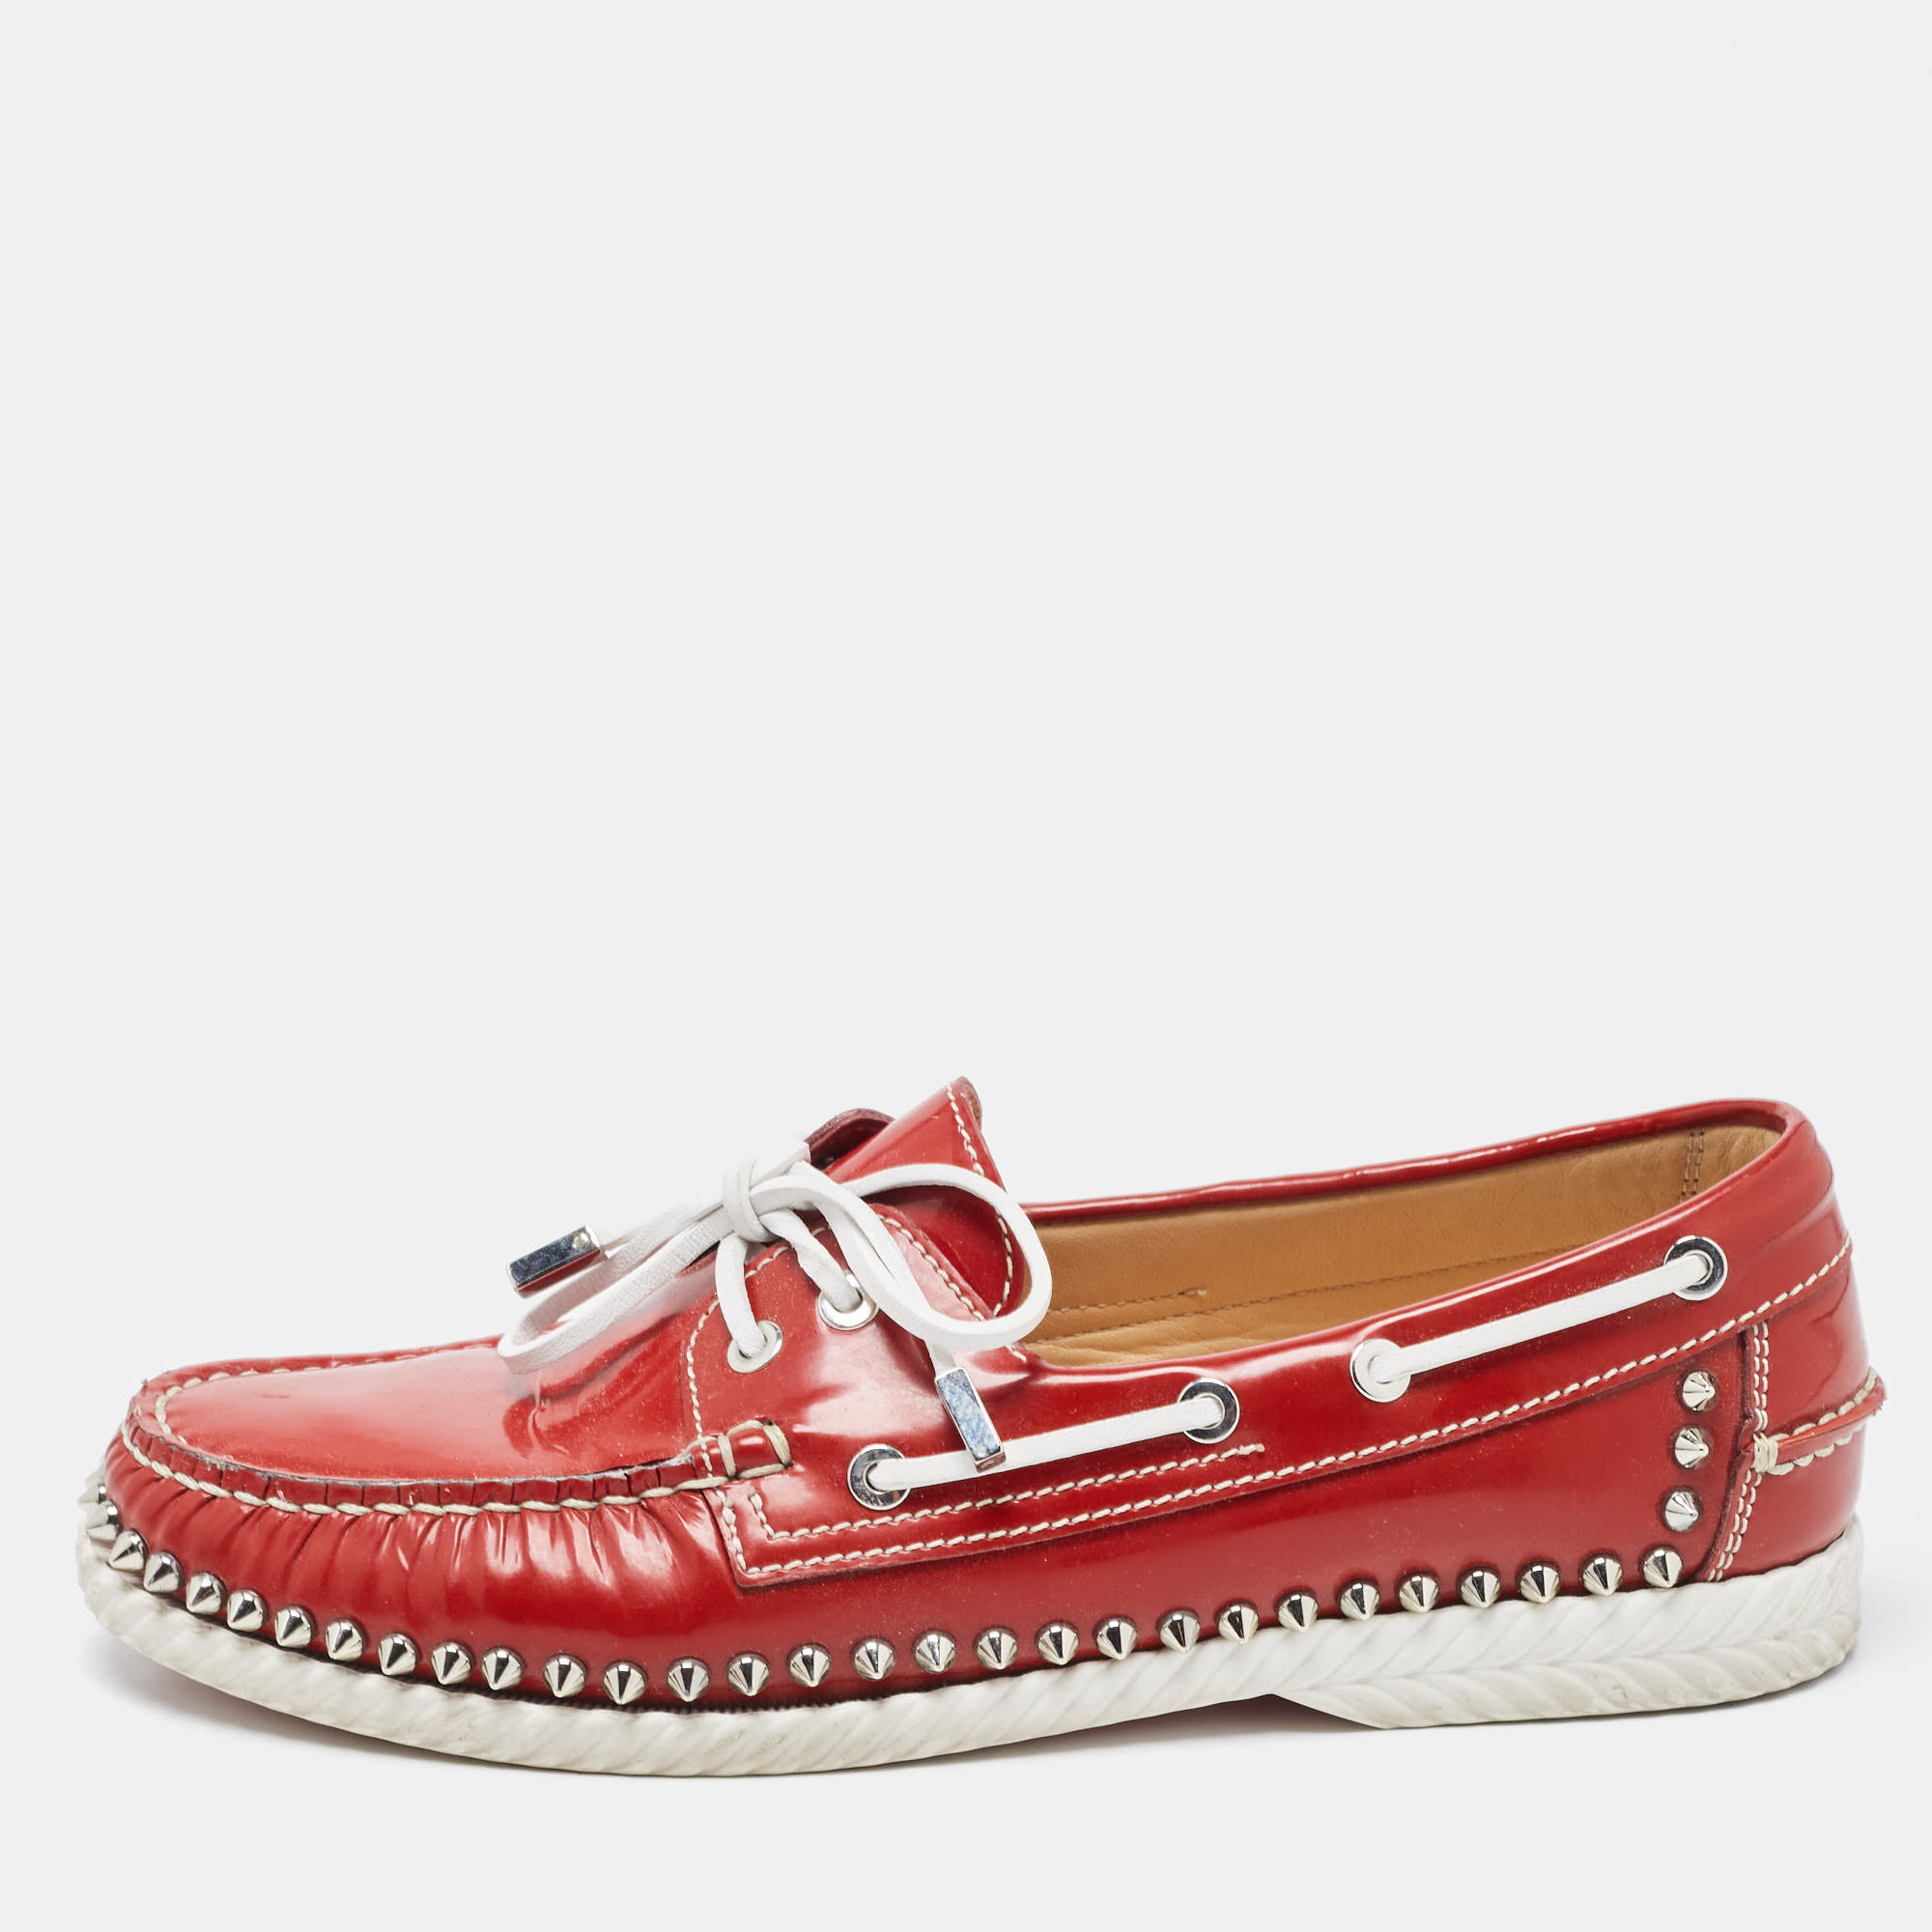 

Christian Louboutin Red Patent Leather Steckel Spike Boat Loafers Size